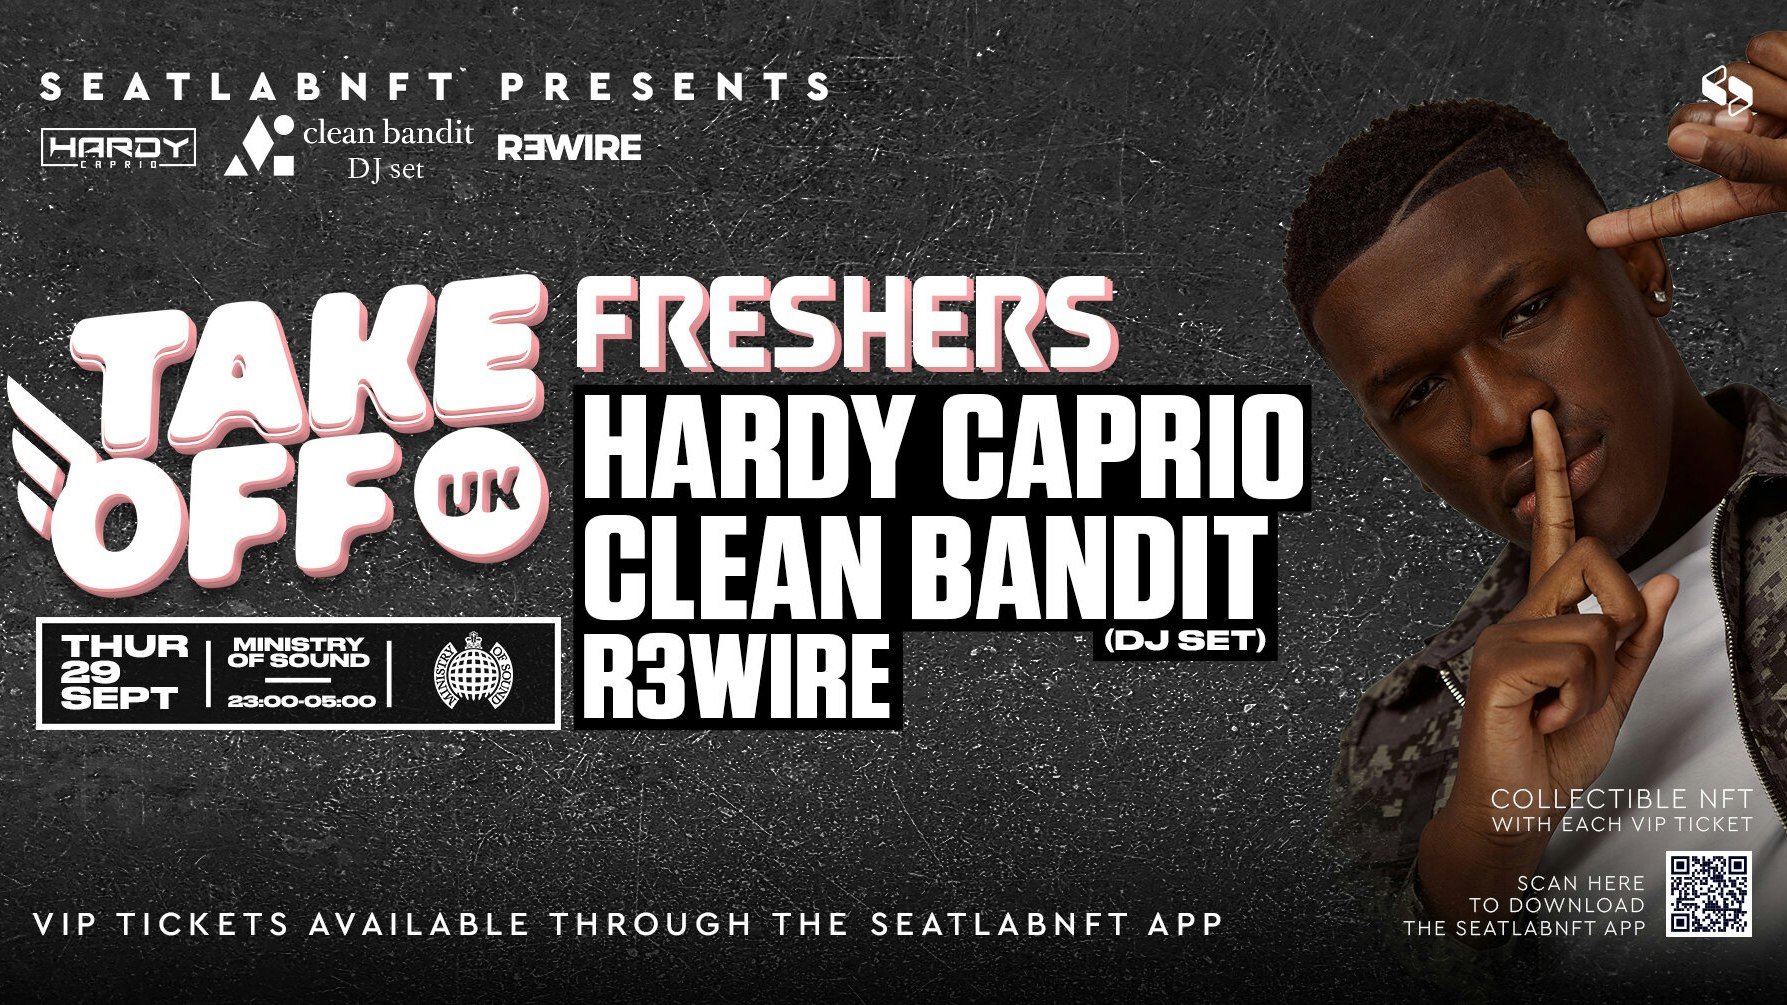 Take Off Freshers Rave at Ministry of Sound ft Hardy Caprio, Clean Bandit & more!